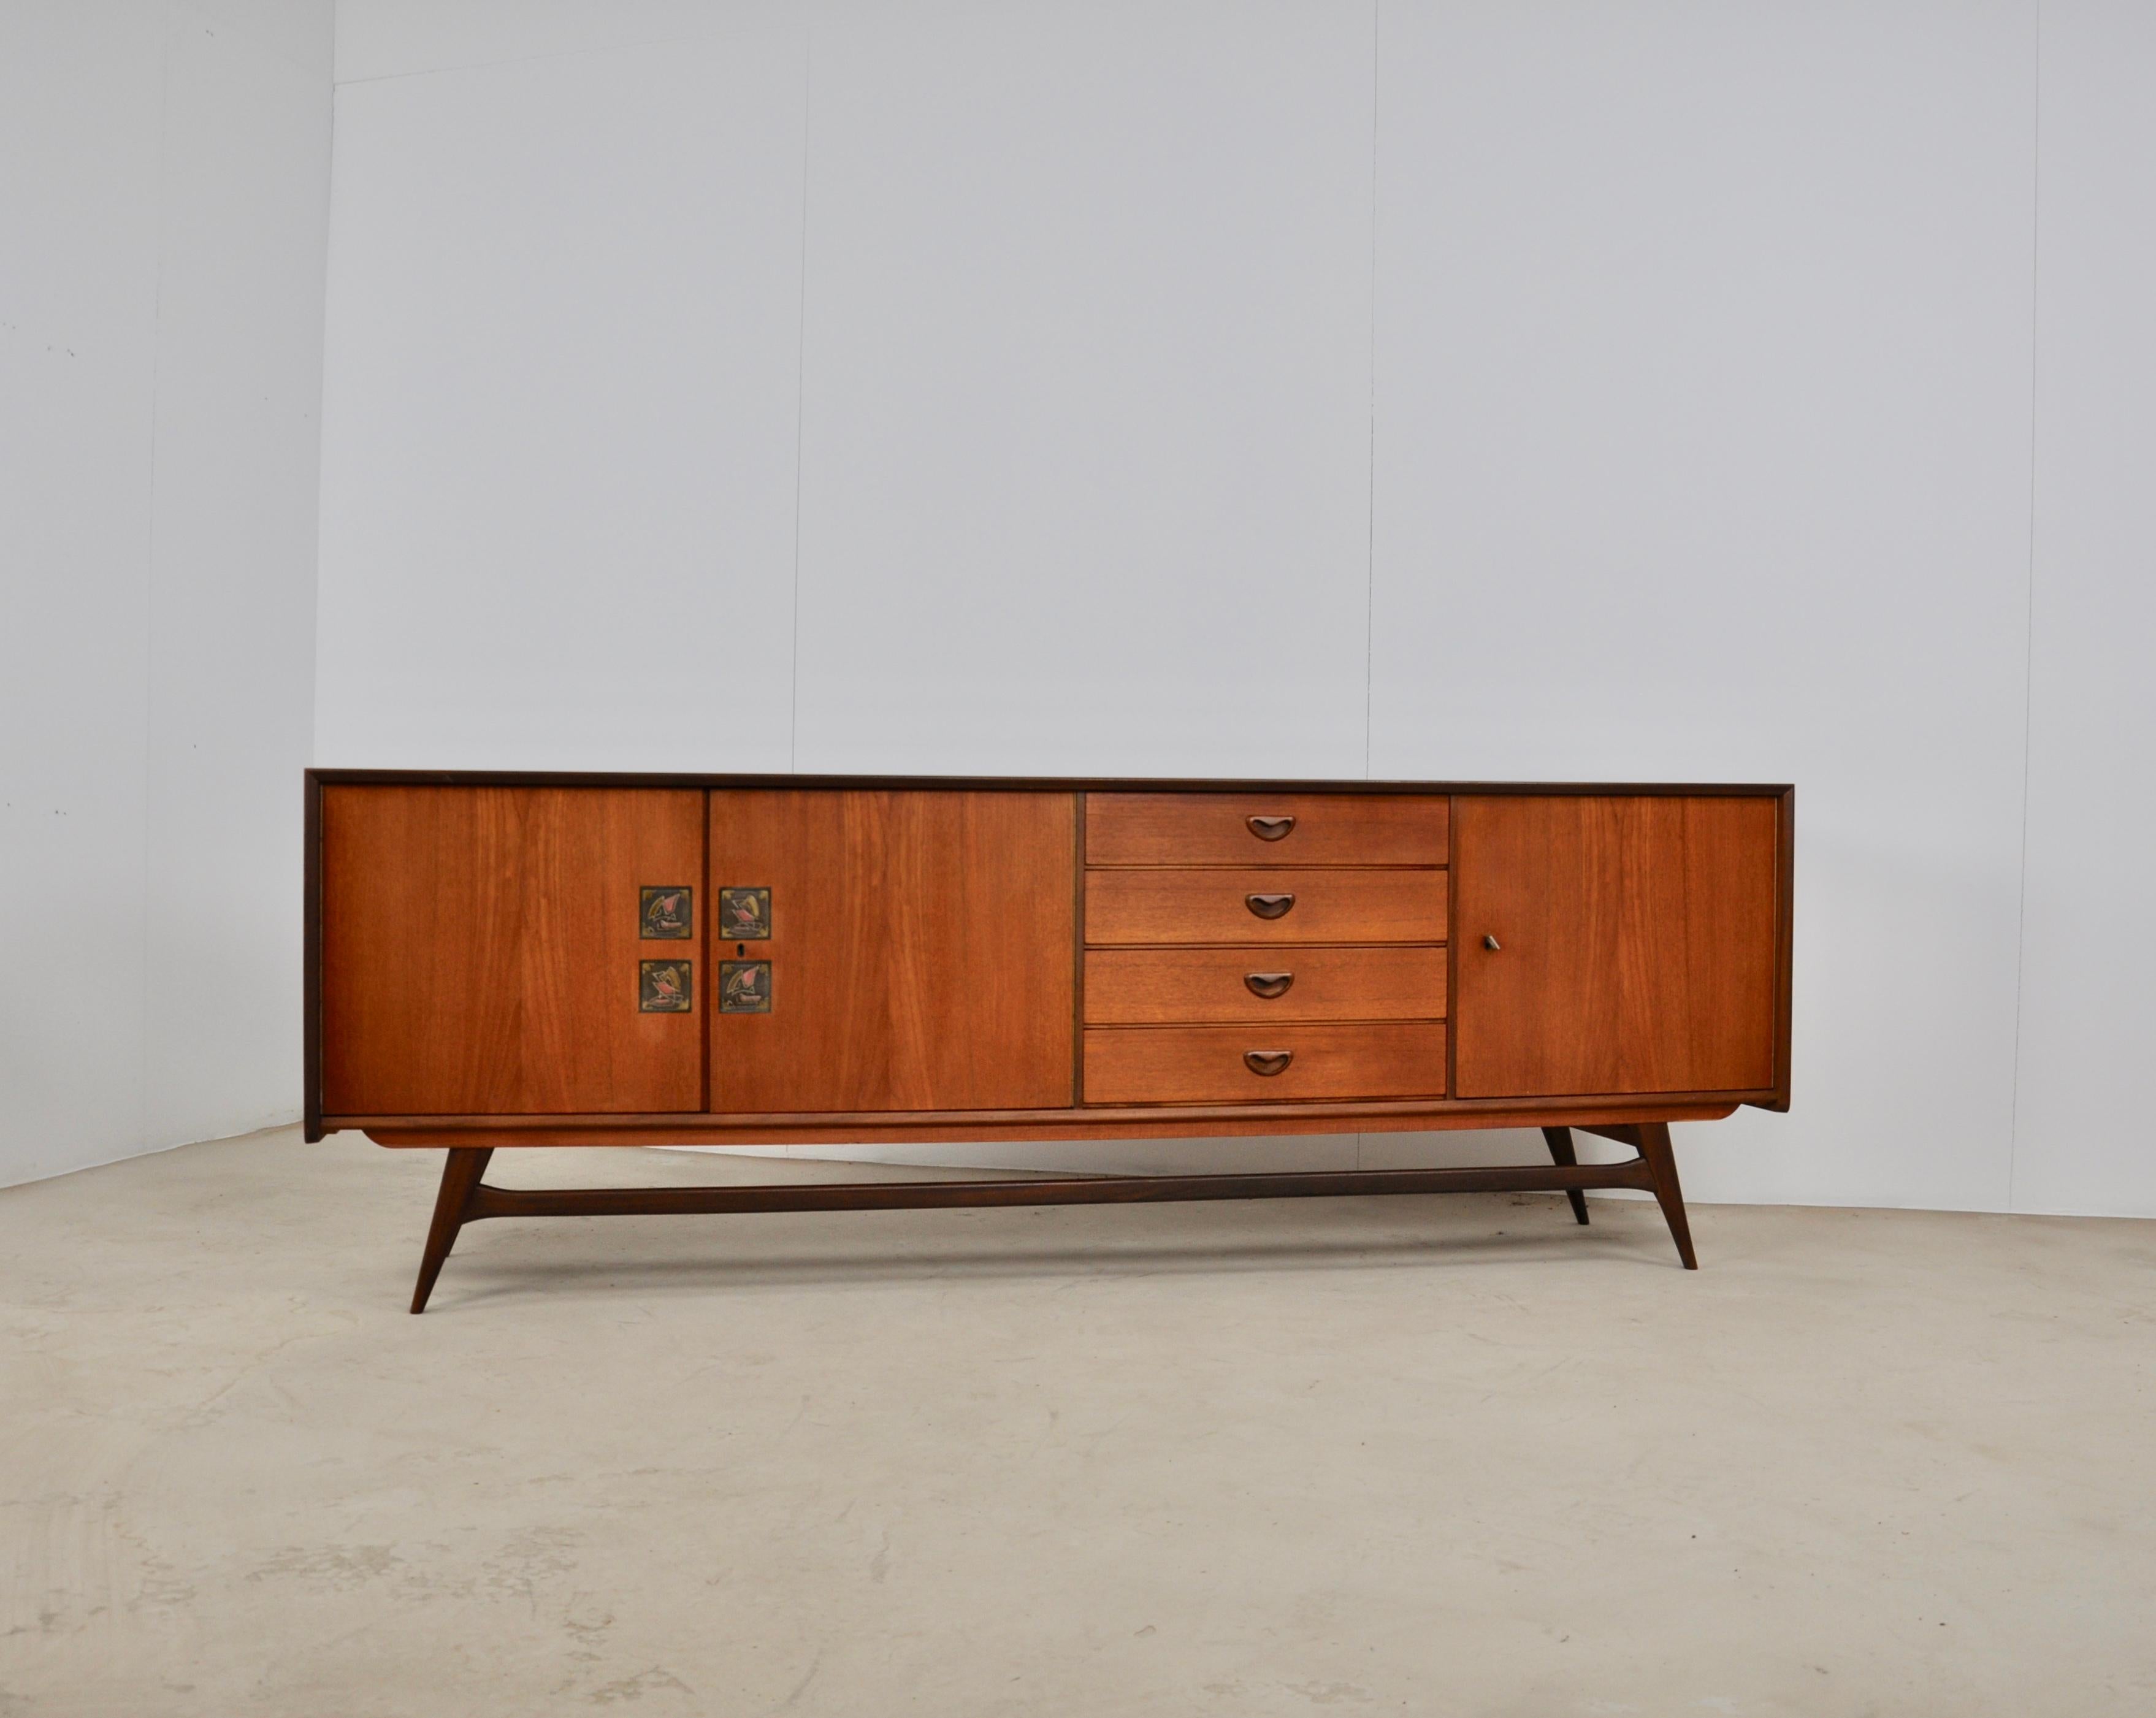 Sideboard with 3 doors and 4 drawers. Very light wear and tear due to time and use.